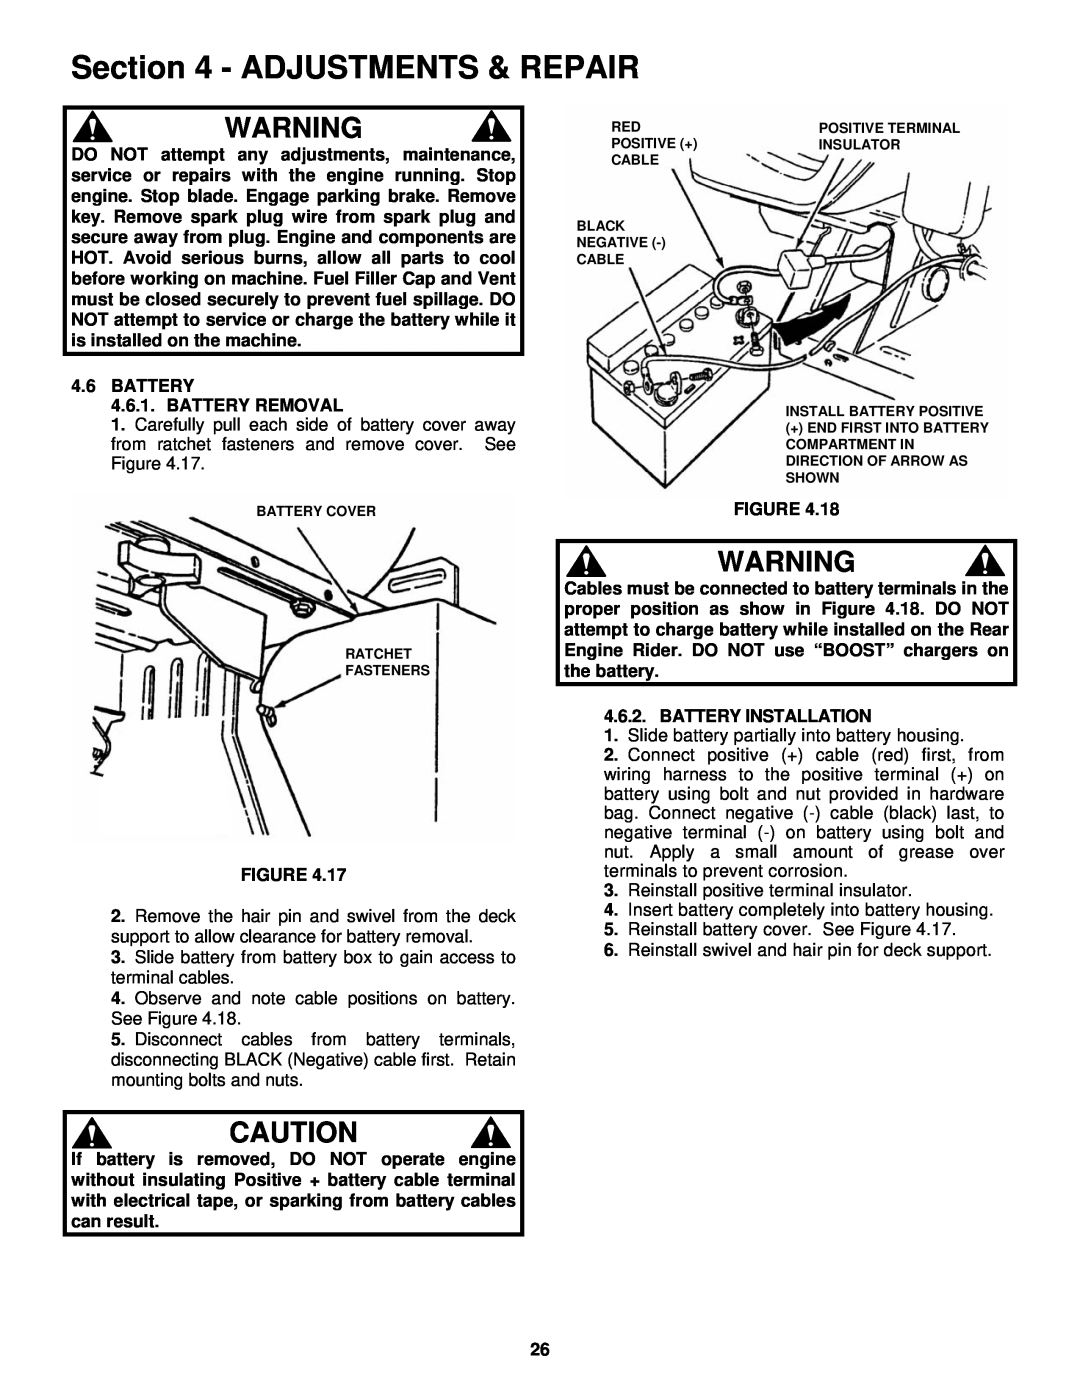 Snapper important safety instructions Adjustments & Repair, BATTERY 4.6.1. BATTERY REMOVAL 